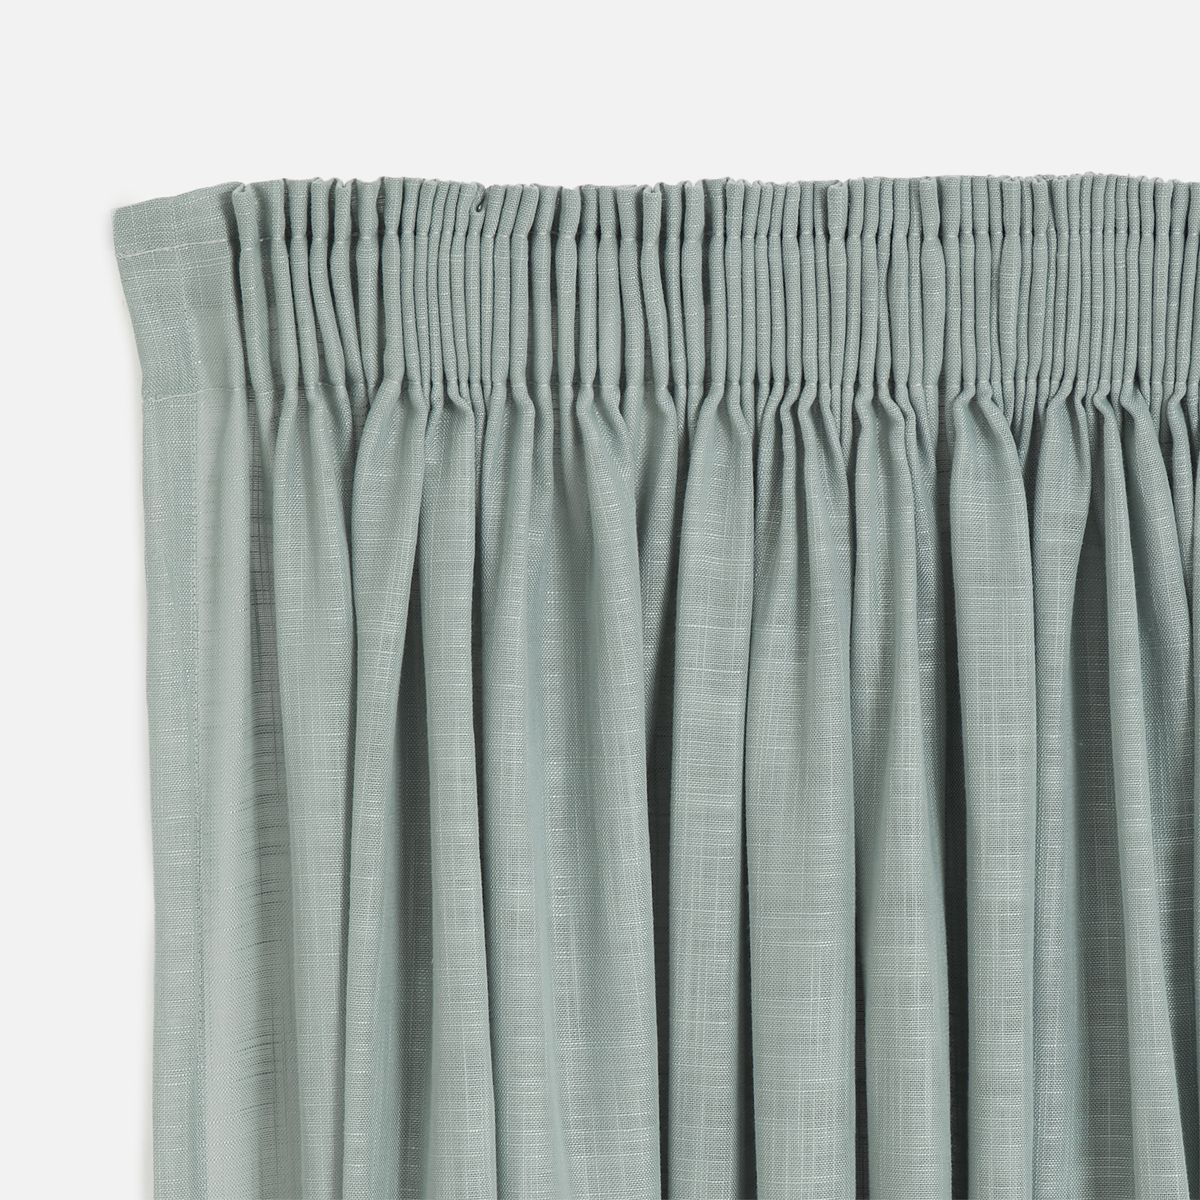 George & Mason - Textured Sheer Taped Unlined Curtain | Buy Online in ...